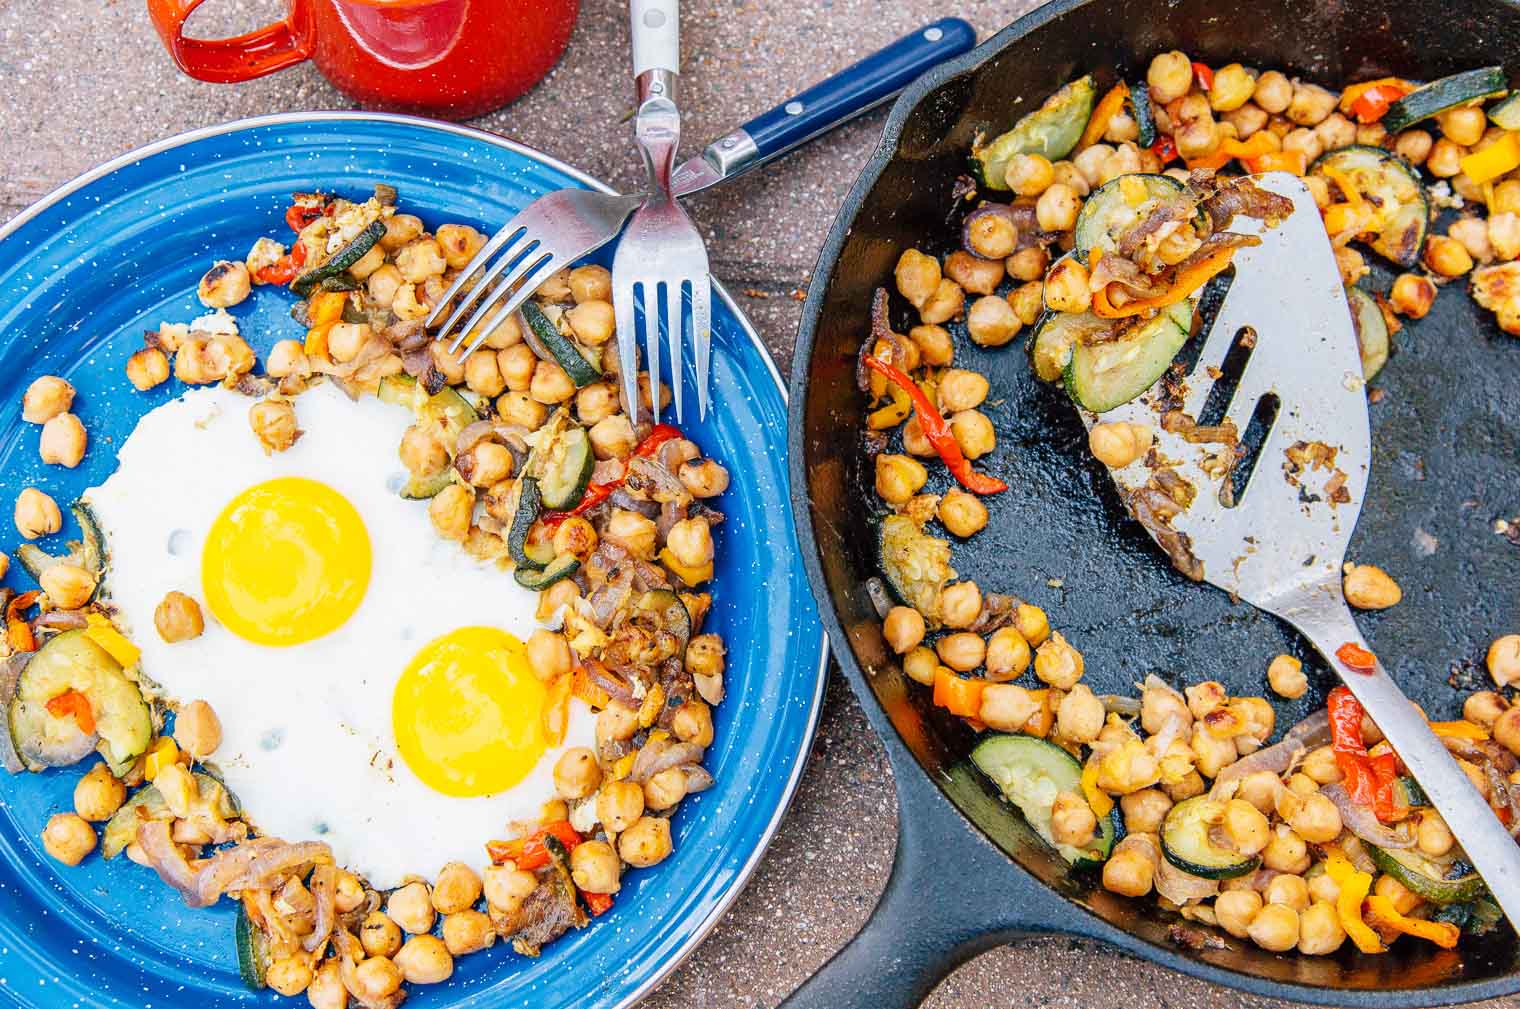 Cast iron skillet with chickpeas next to a blue camping plate with fried eggs